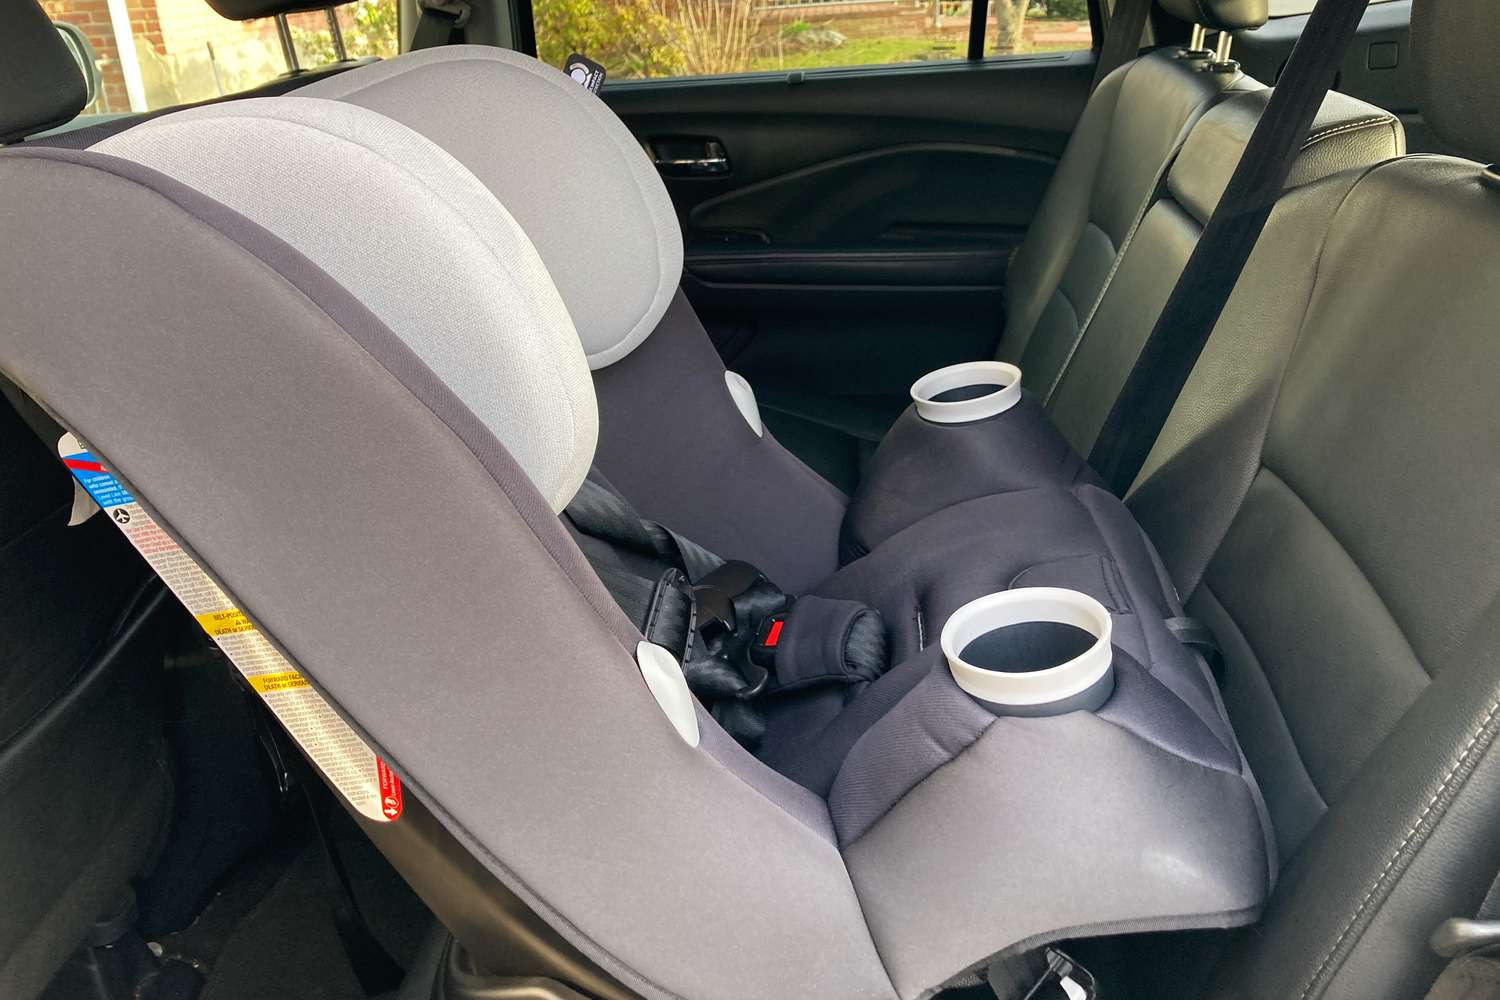 The Maxi-Cosi Pria All-in-One Convertible Car Seat set up in the car